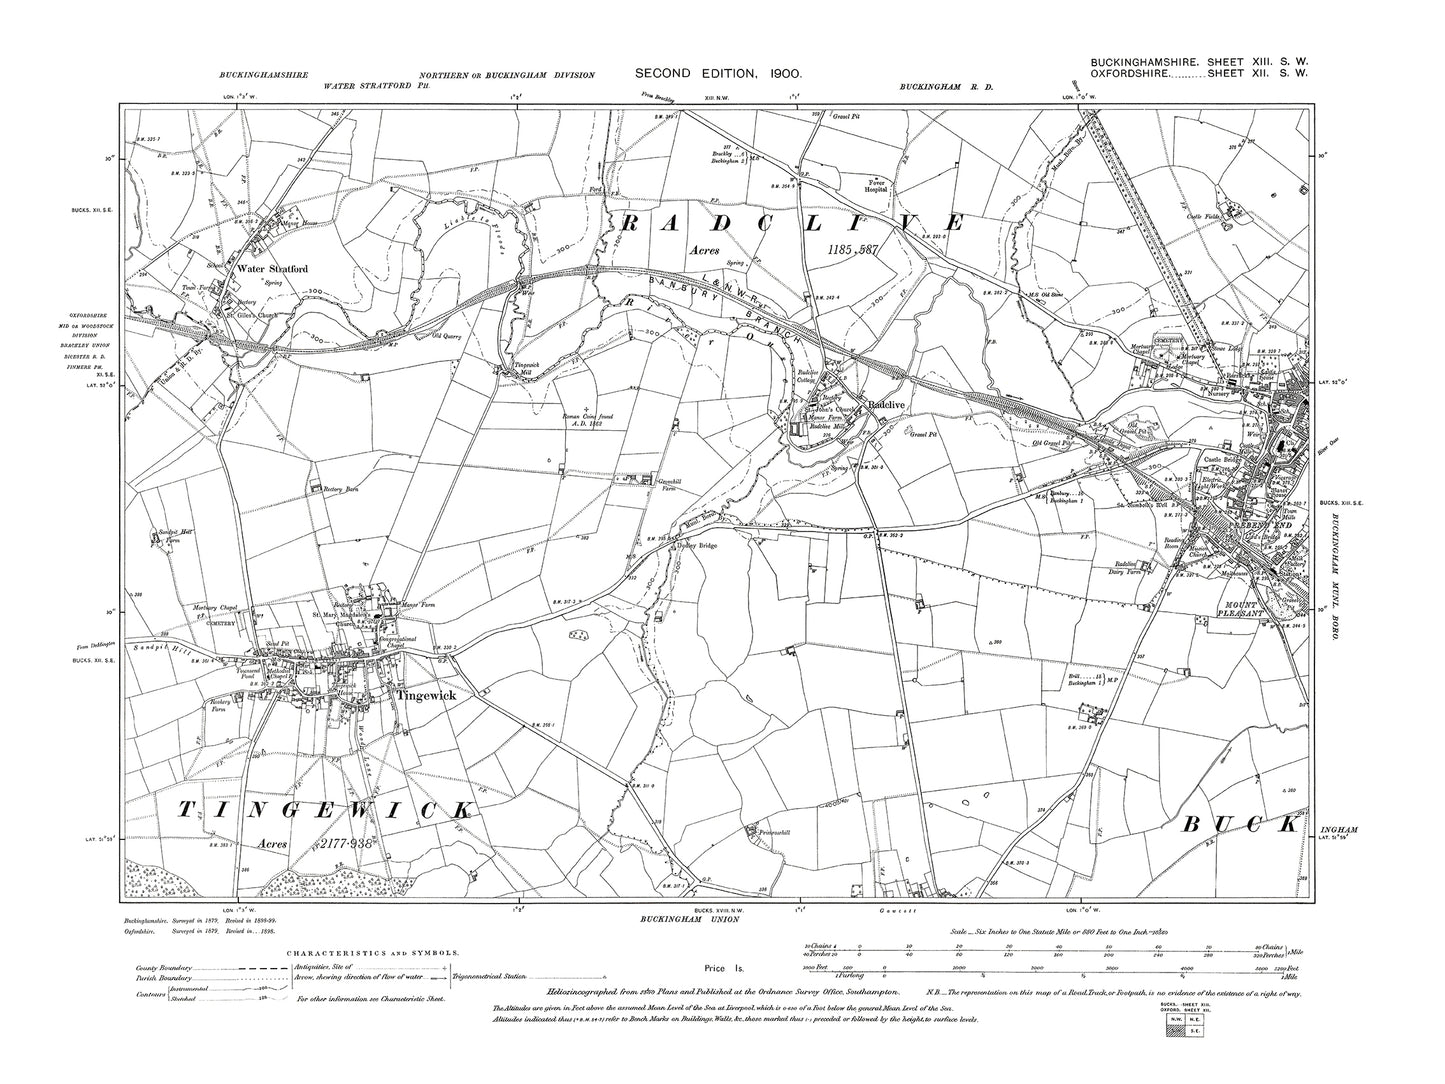 Old OS map dated 1900, showing Buckingham (west), Radclive, Tingewick, Water Stratford (west) in Buckinghamshire 13SW